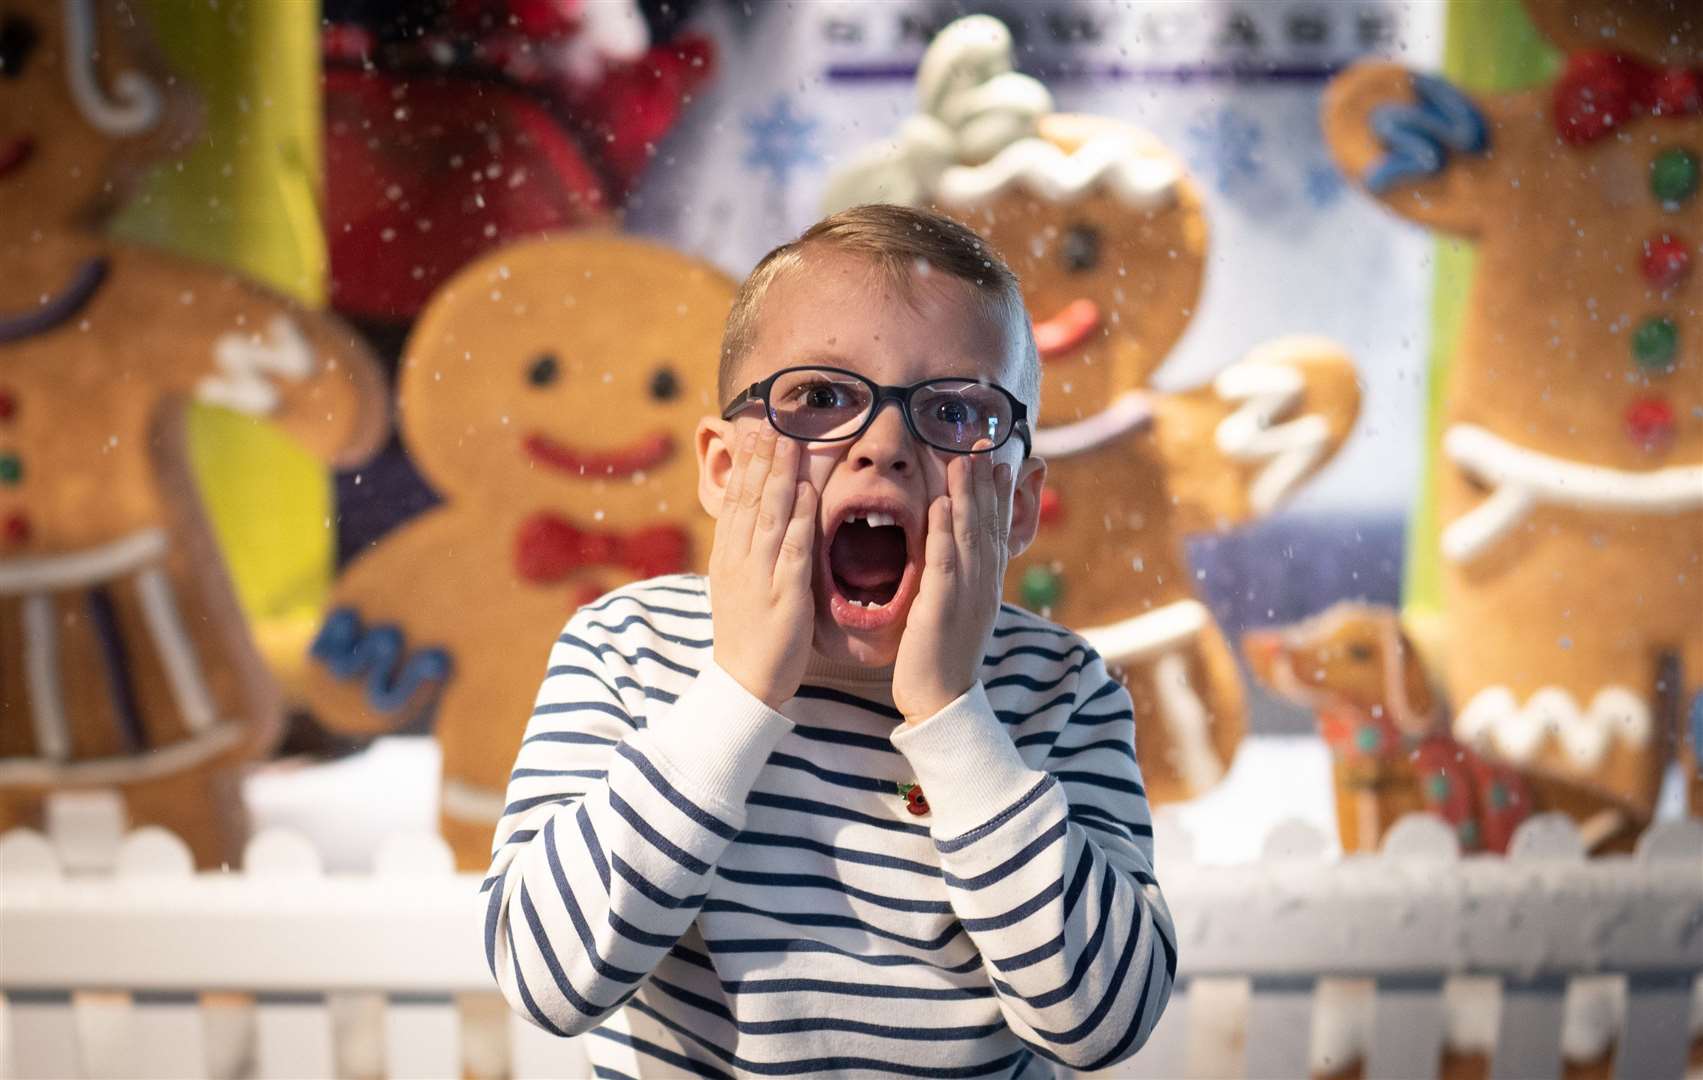 Recreating the Home Alone scene at Showcase Cinema, Bluewater Shopping Centre for a one-off festive film screening